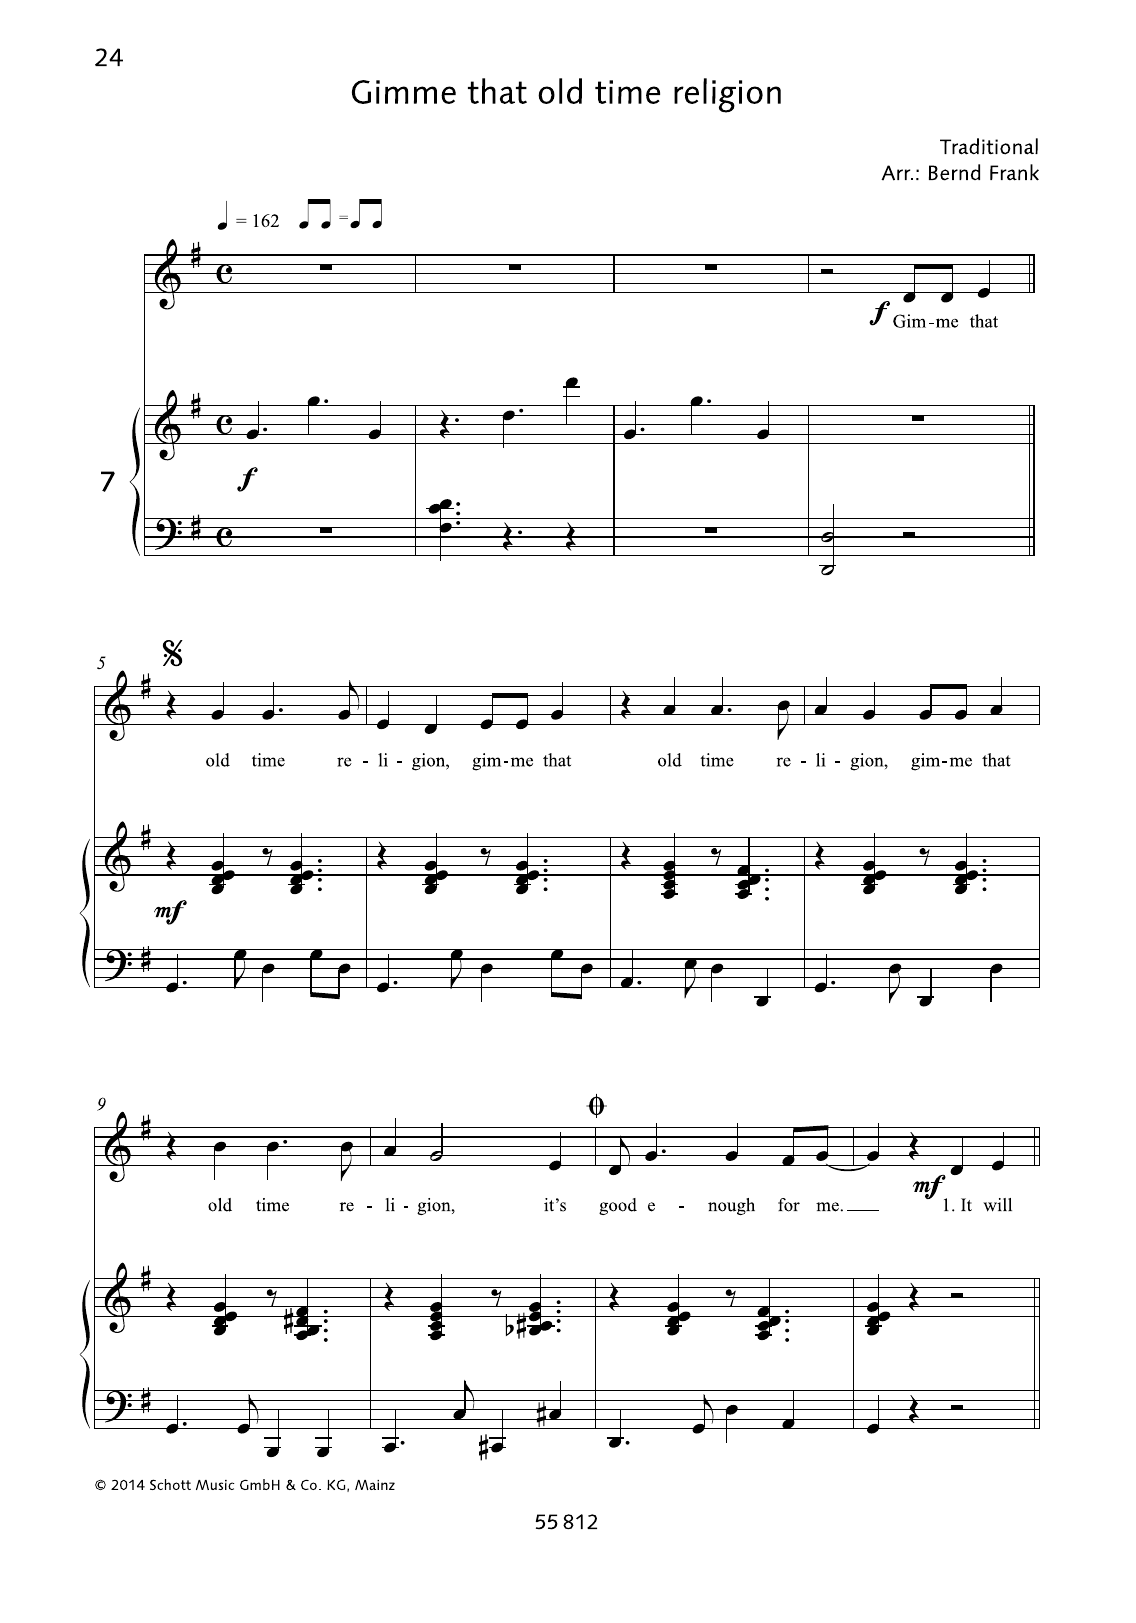 Download Bernd Frank Gimme that old time religion Sheet Music